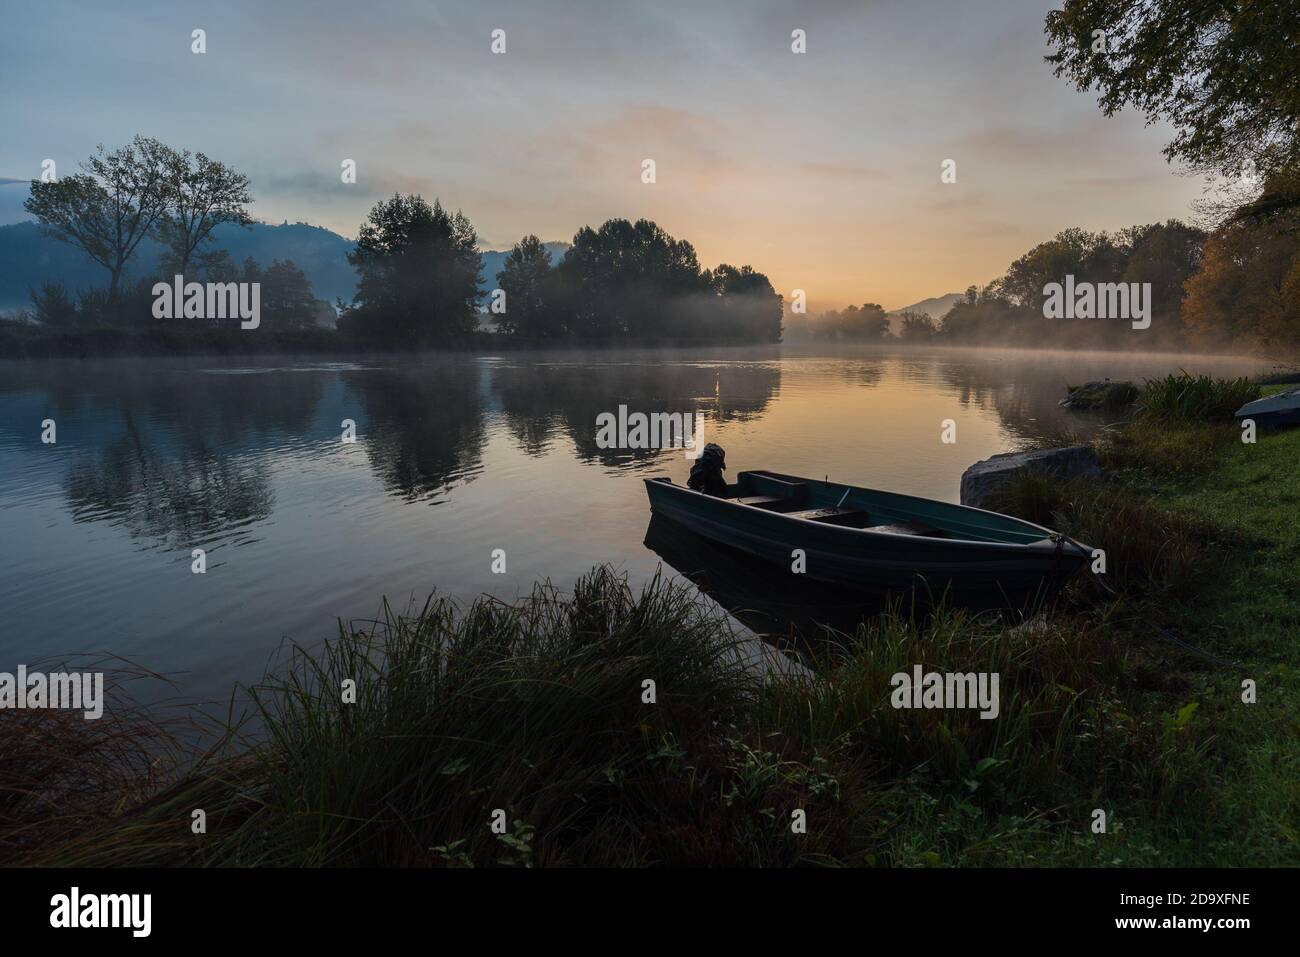 Calm scenic picture of small fishing boat on the Adda river on a hazy sunrise with foliage Stock Photo